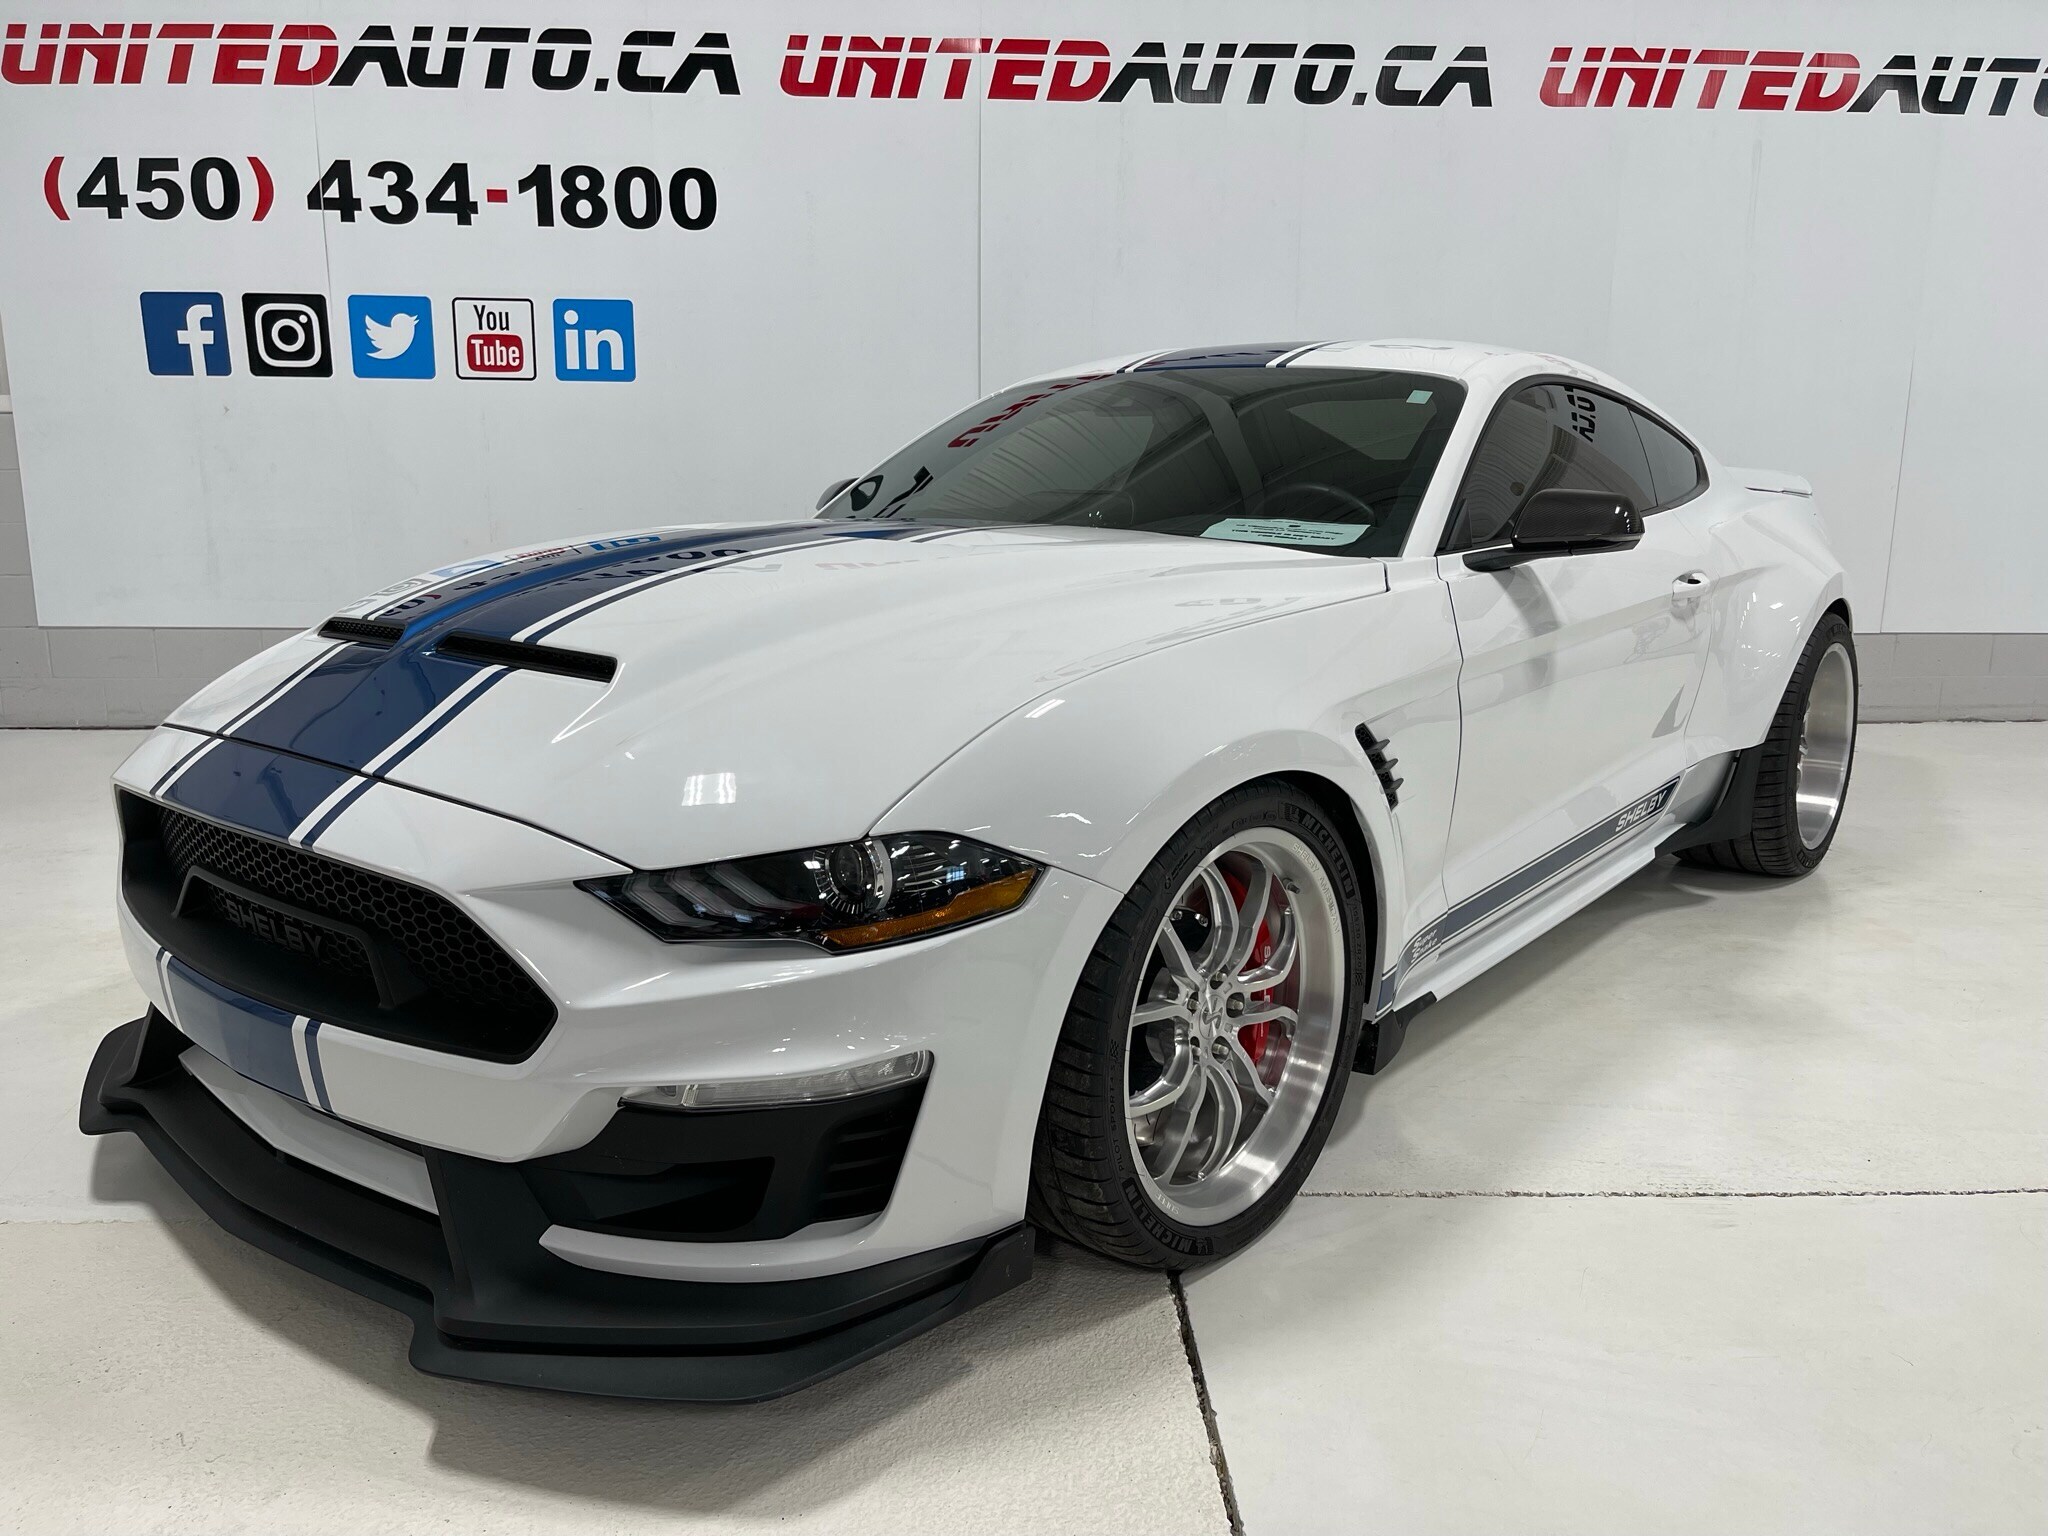 2020 Ford SHELBY **SUPER SNAKE 825 HP*WIDE BODY**